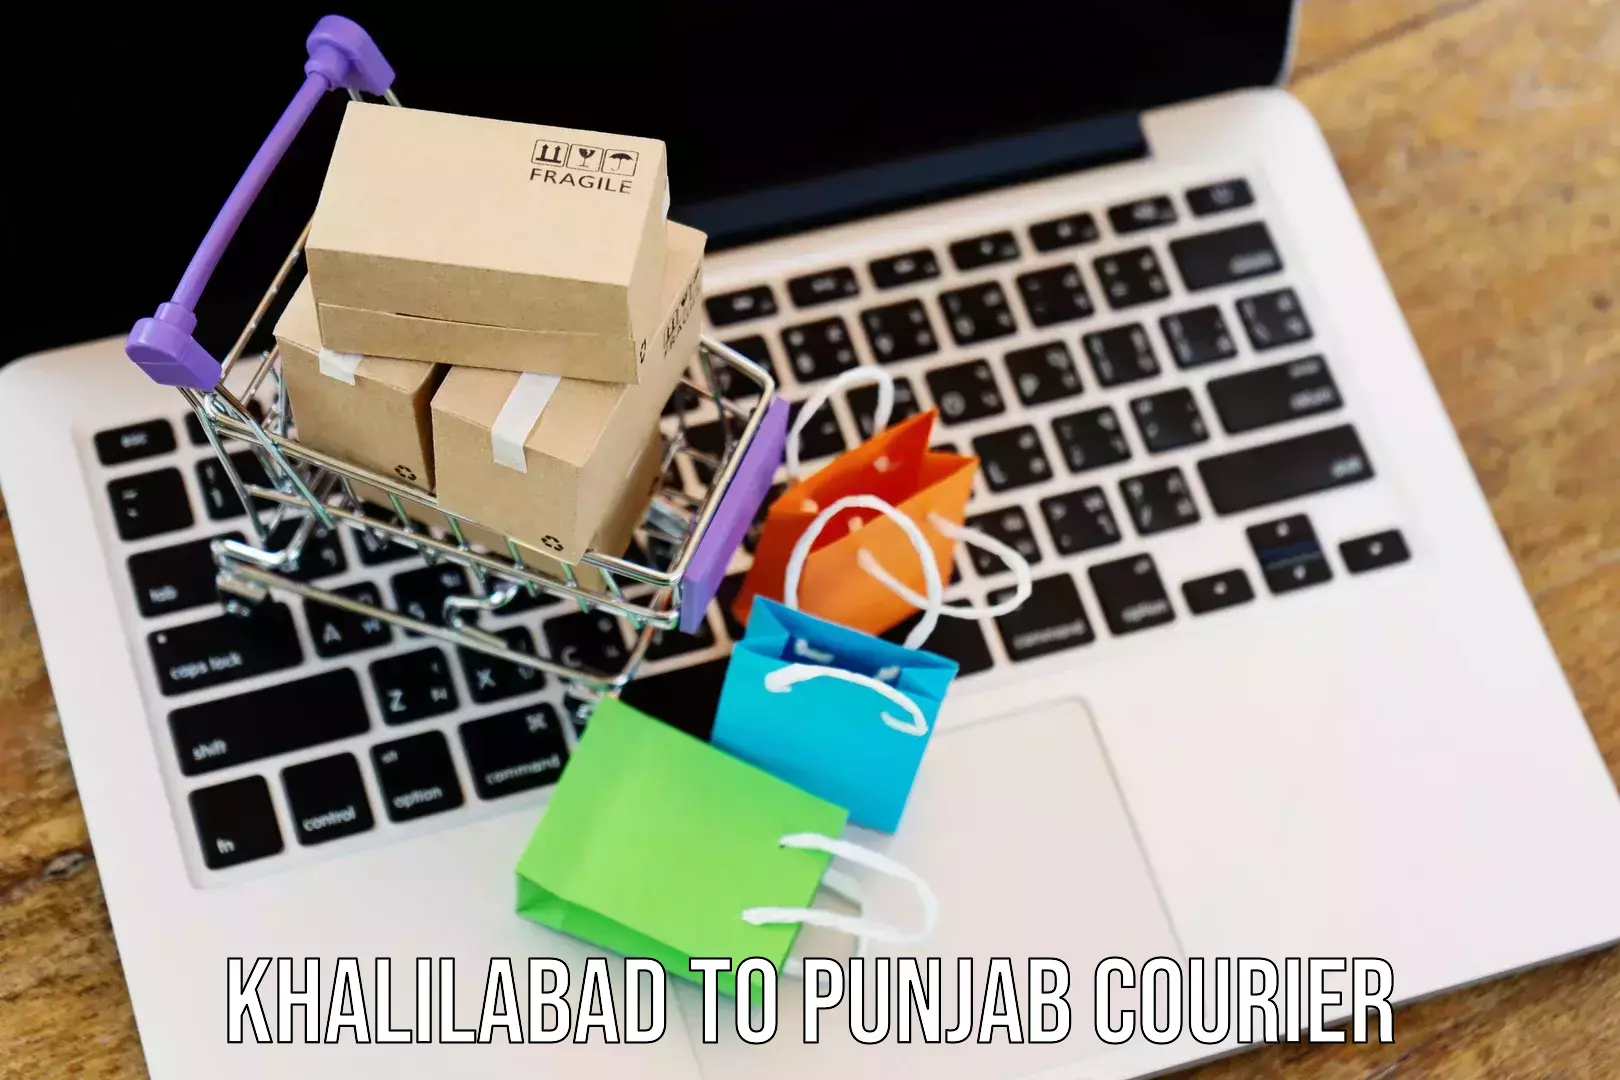 Easy access courier services Khalilabad to Punjab